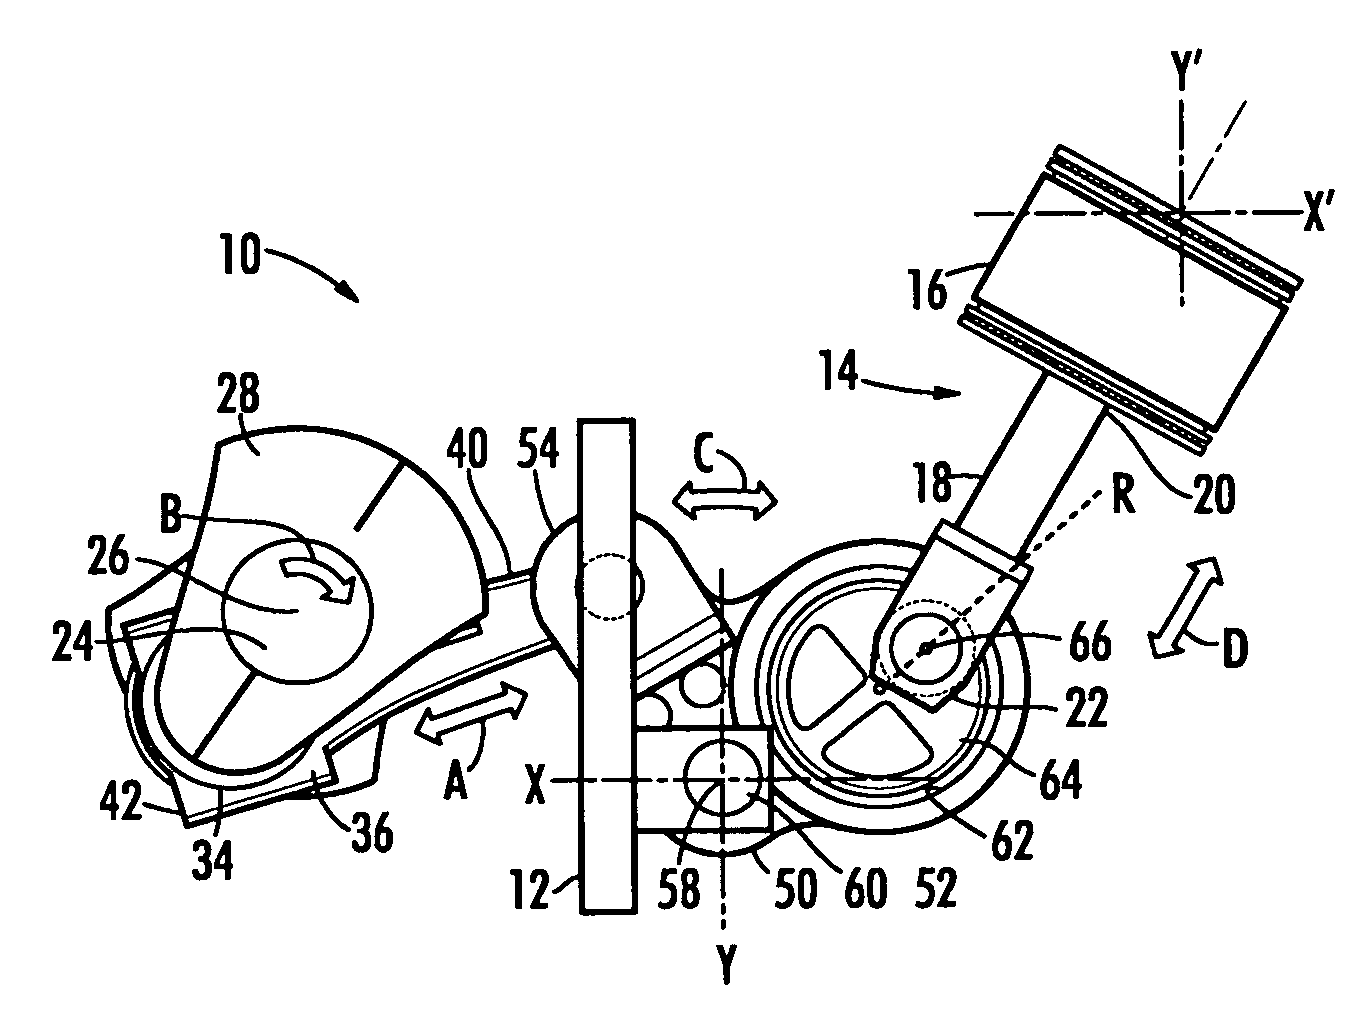 Motion control mechanism for a piston engine